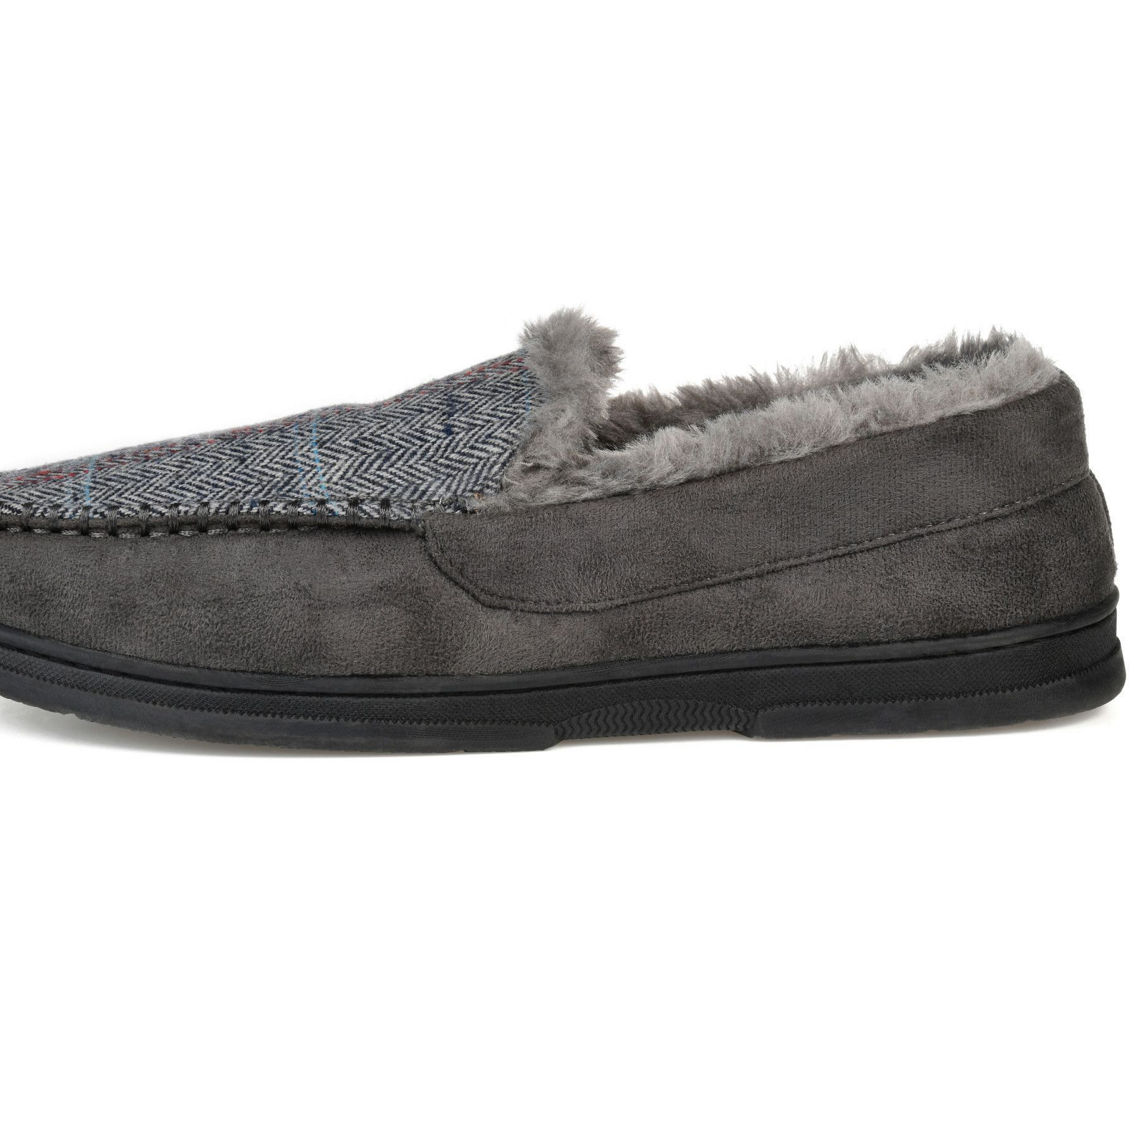 Vance Co. Winston Moccasin Slippers - Image 4 of 5